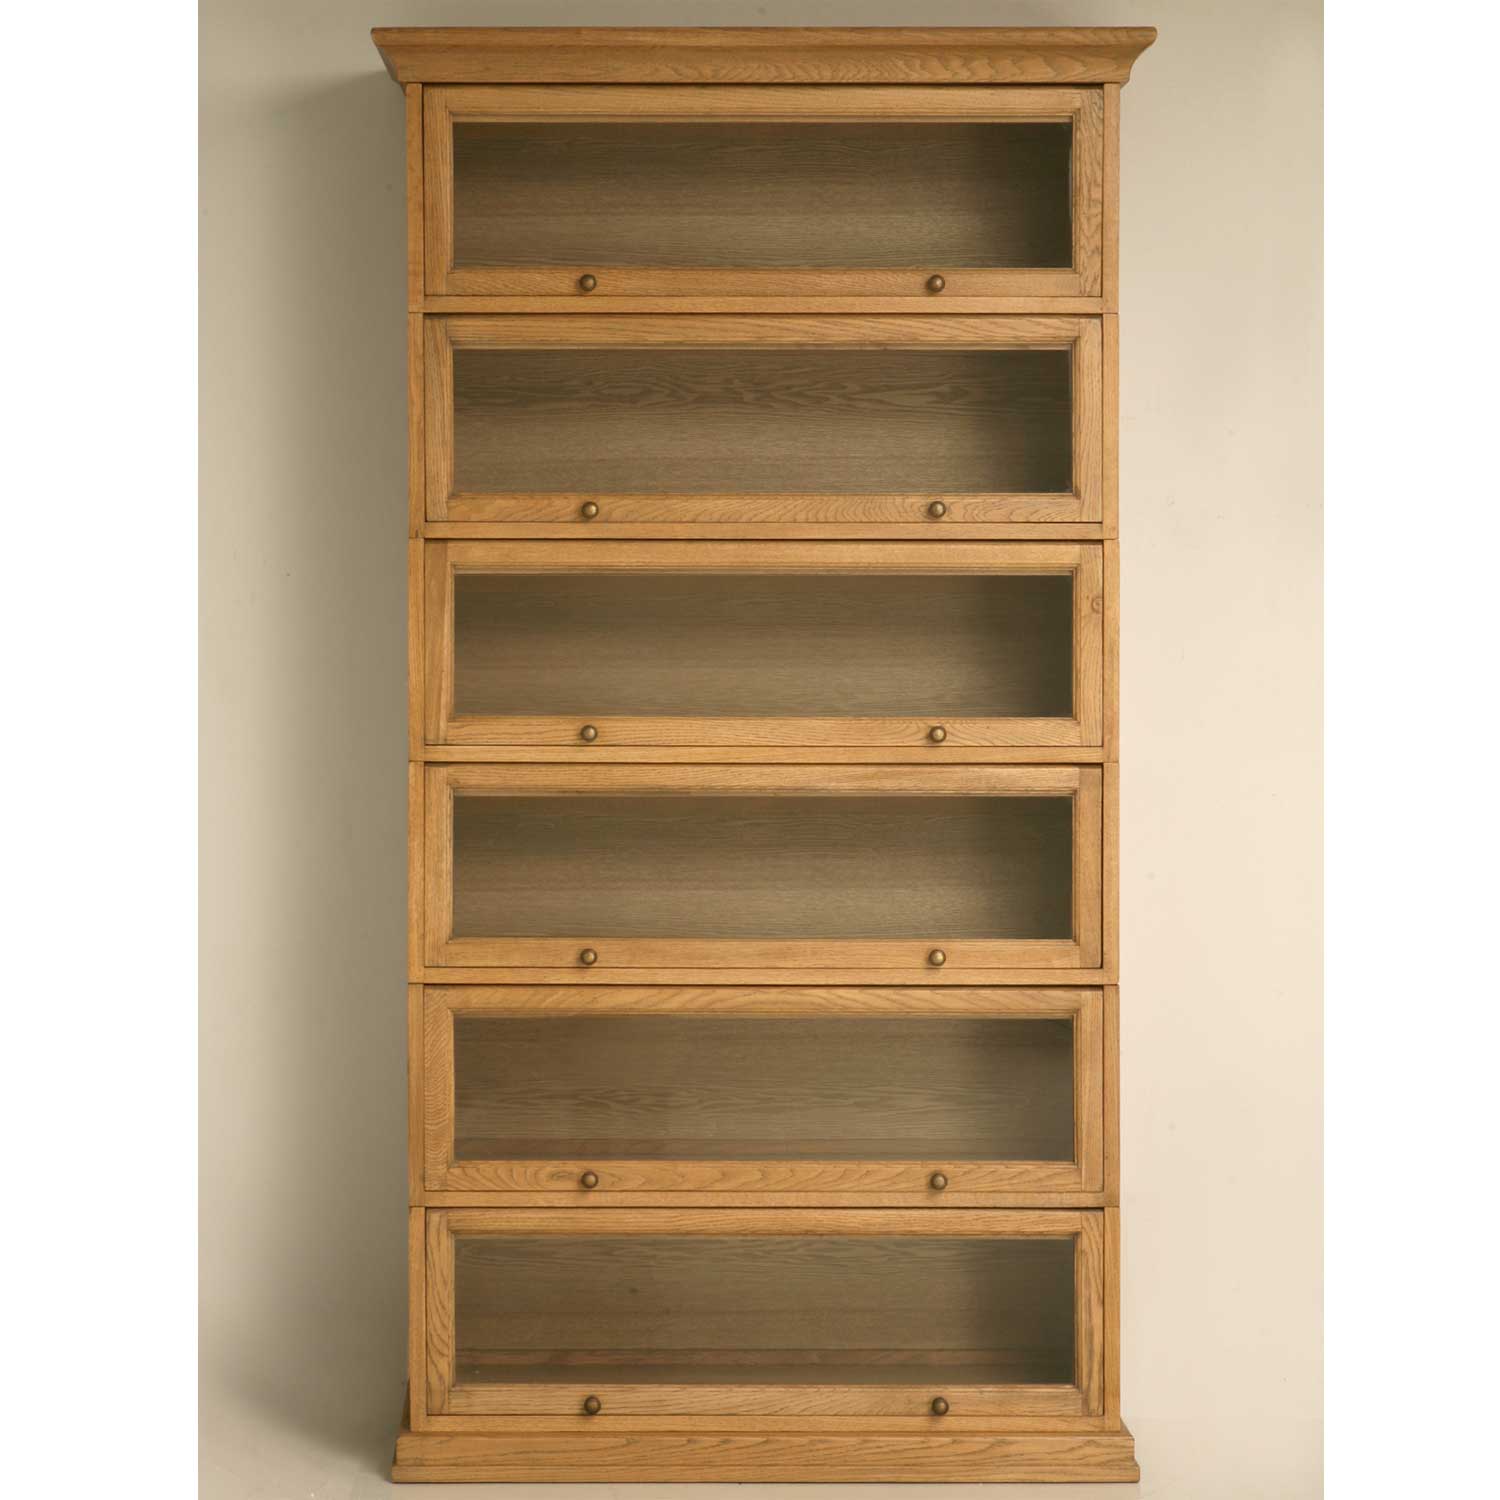 Oak Barrister Bookcase to Organize Your Books | Office Furniture